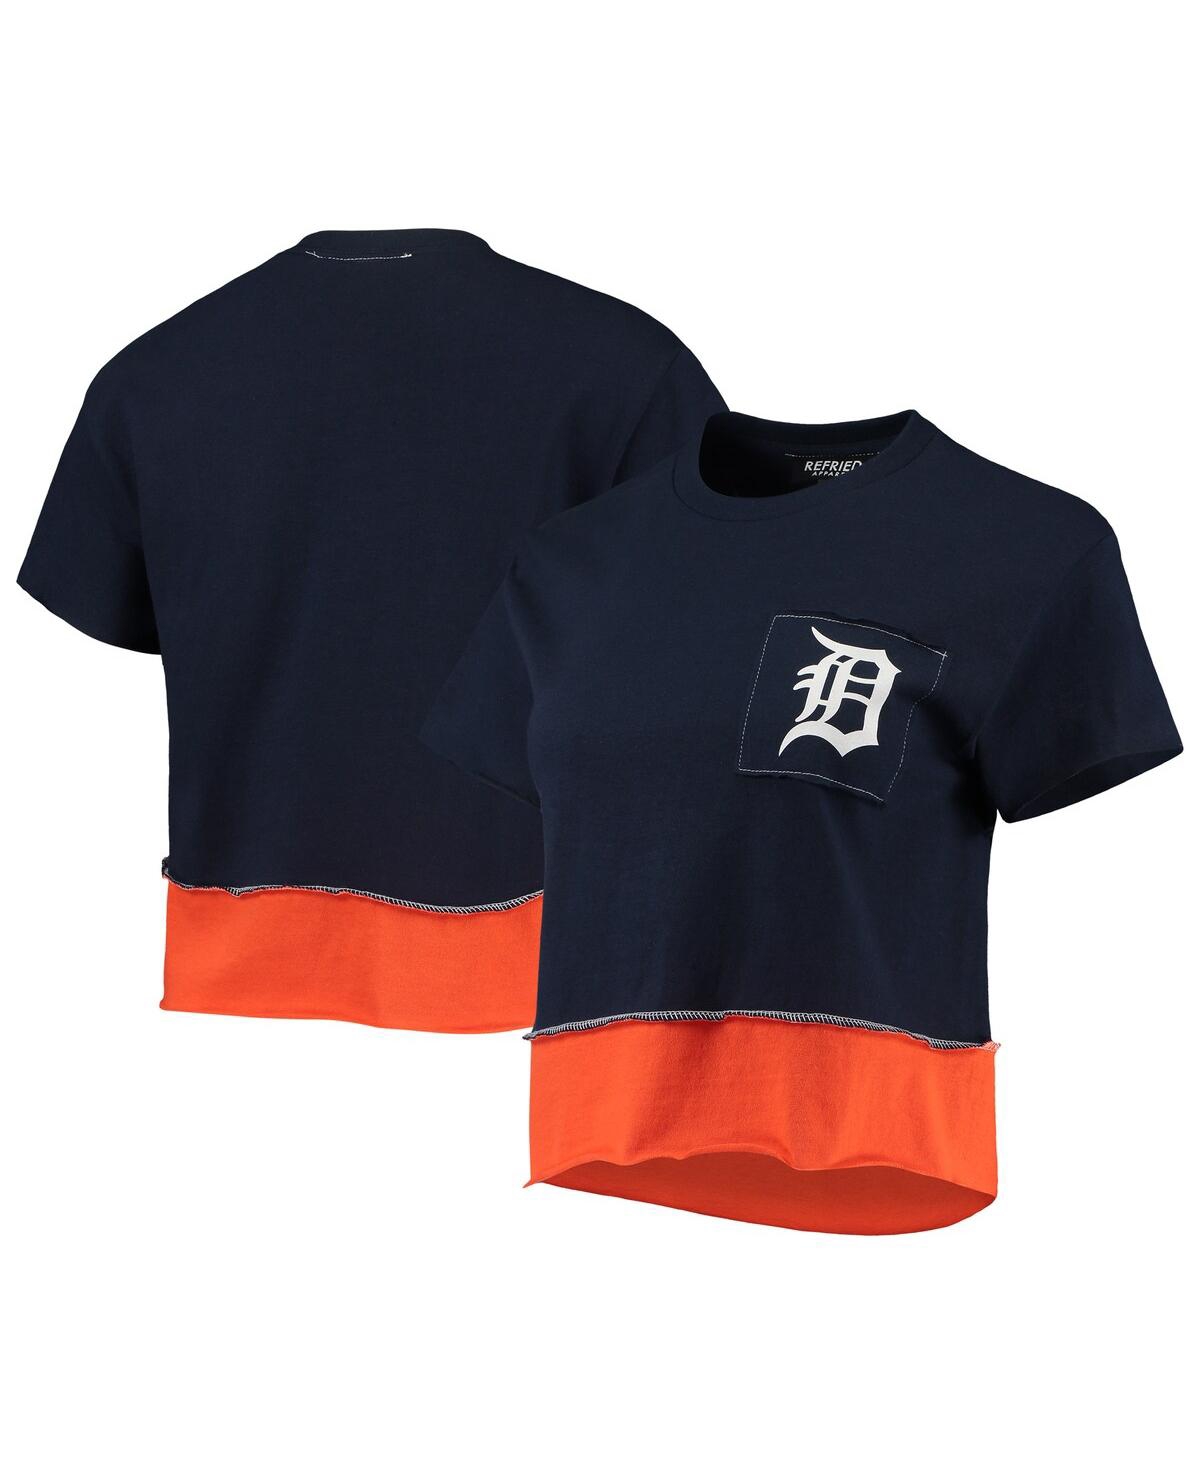 REFRIED APPAREL WOMEN'S REFRIED APPAREL NAVY DETROIT TIGERS CROPPED T-SHIRT